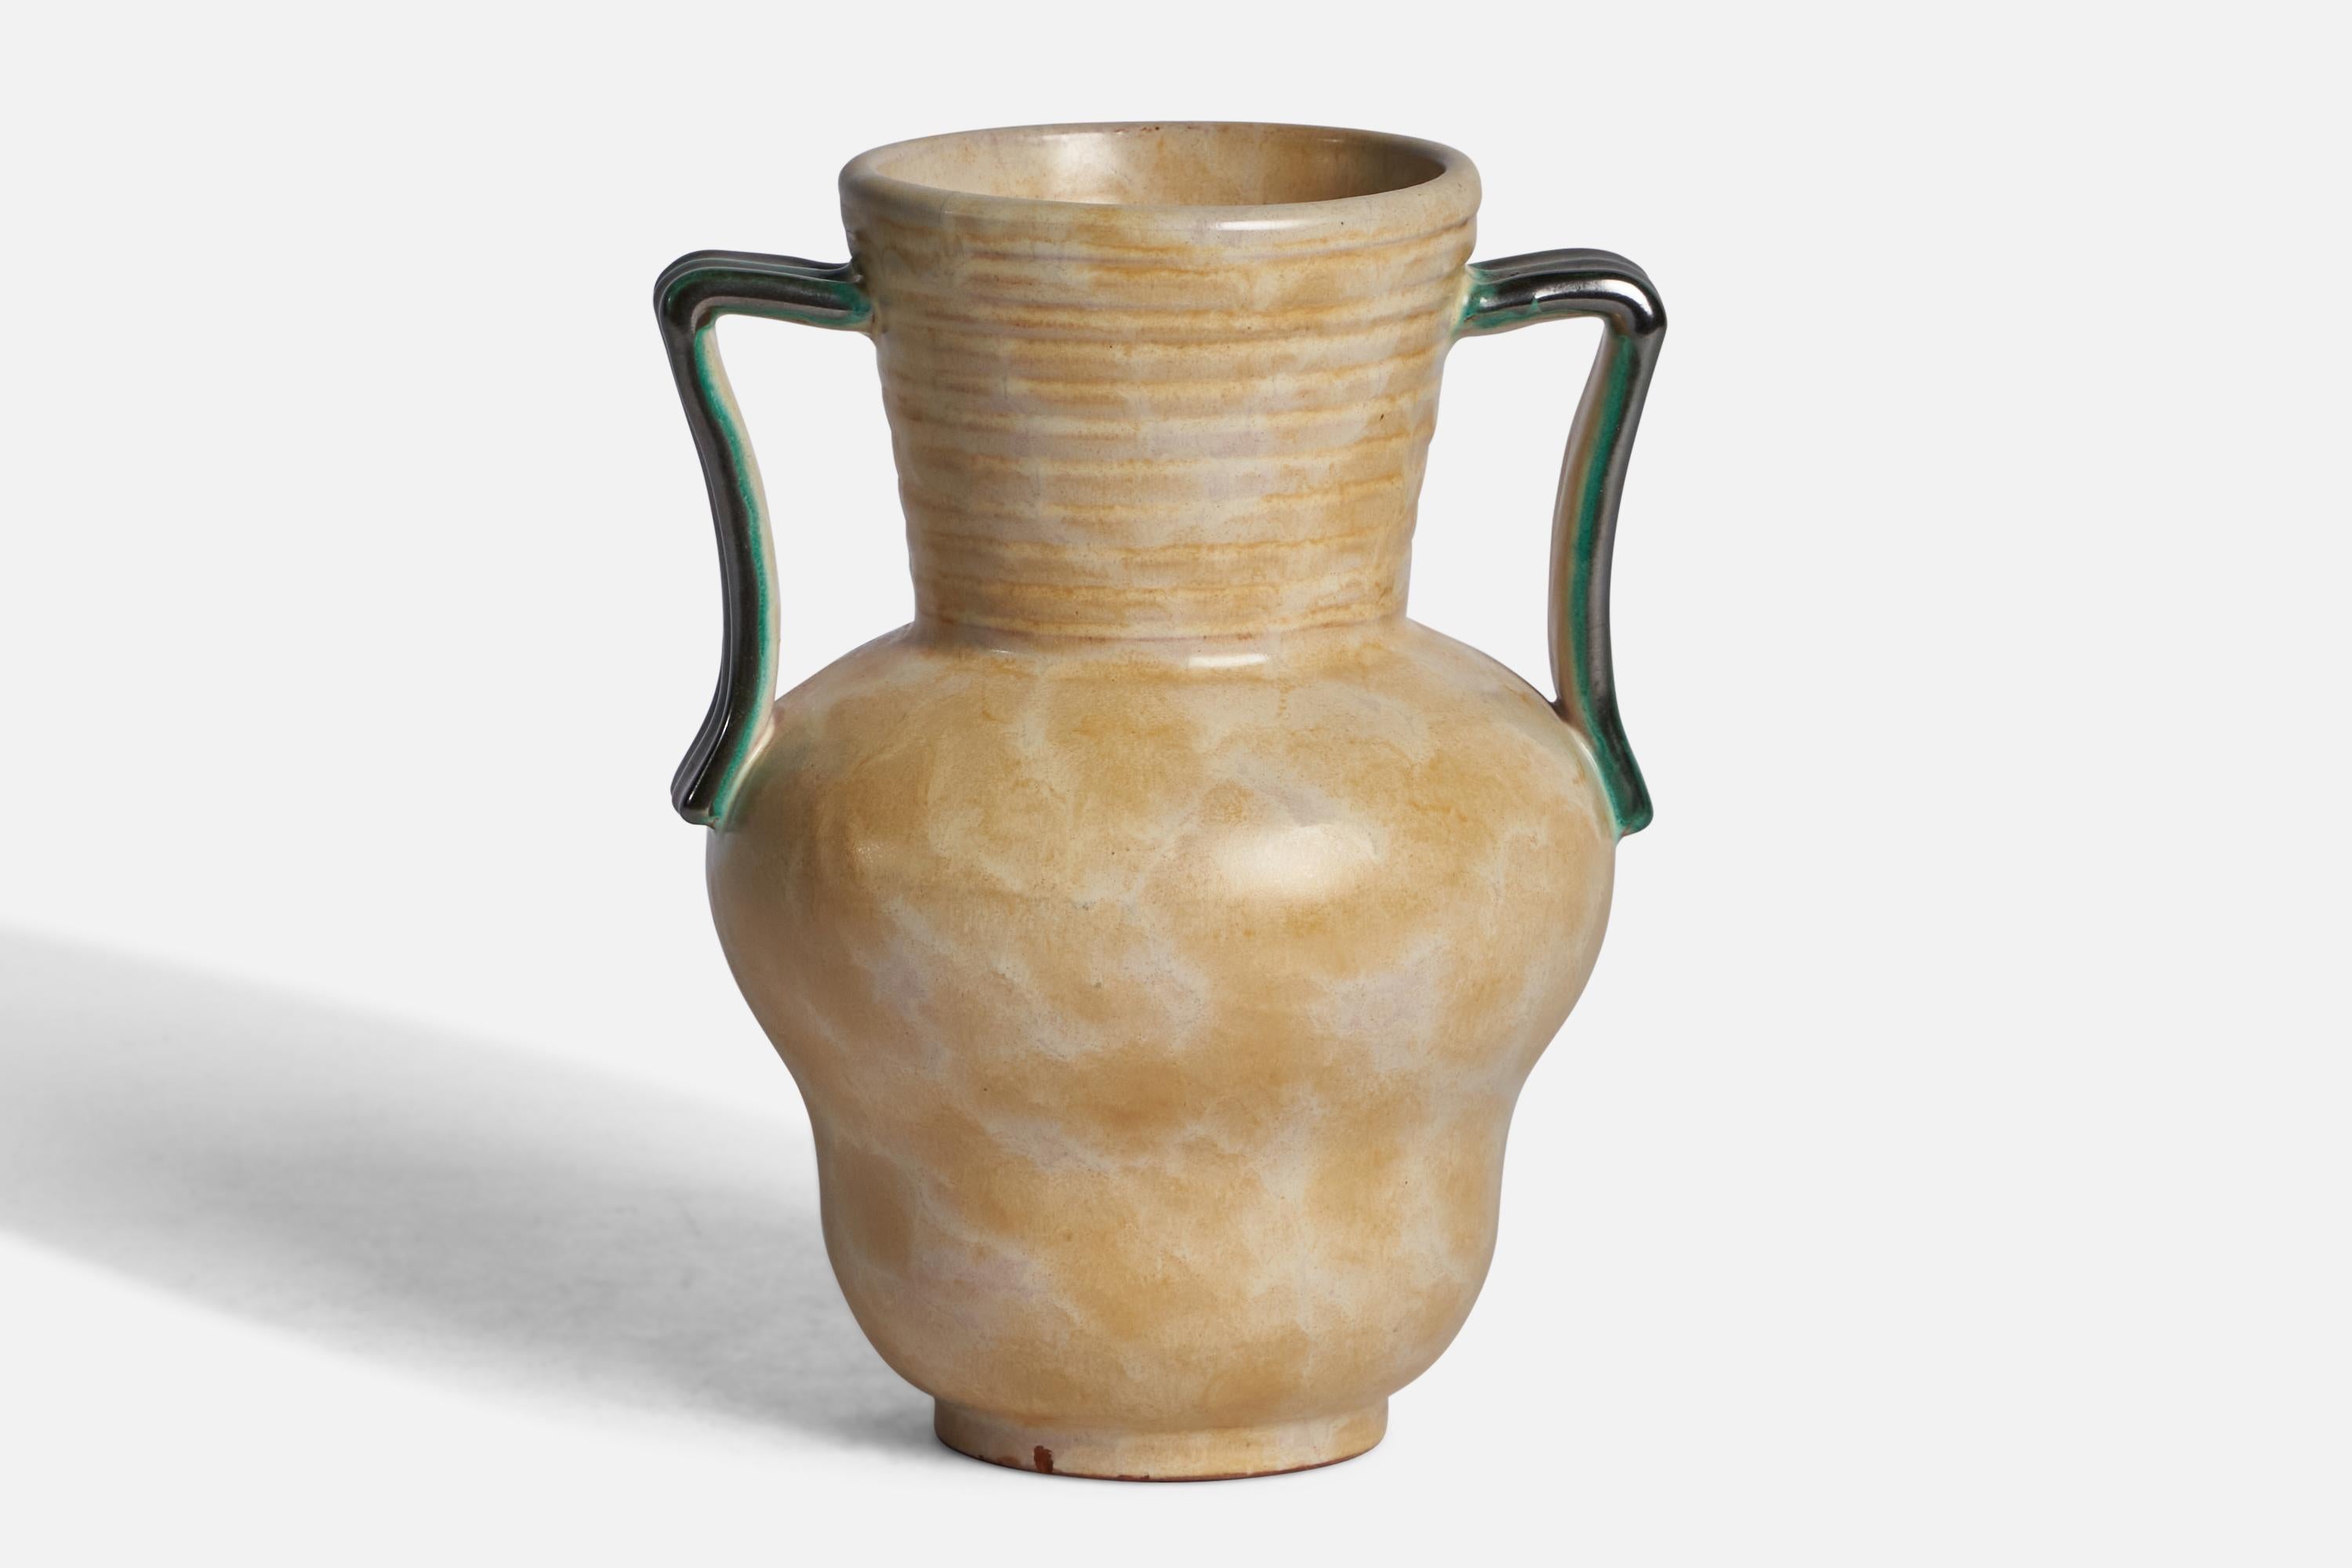 A green and beige-glazed earthenware vase designed and produced in Sweden, 1930s.